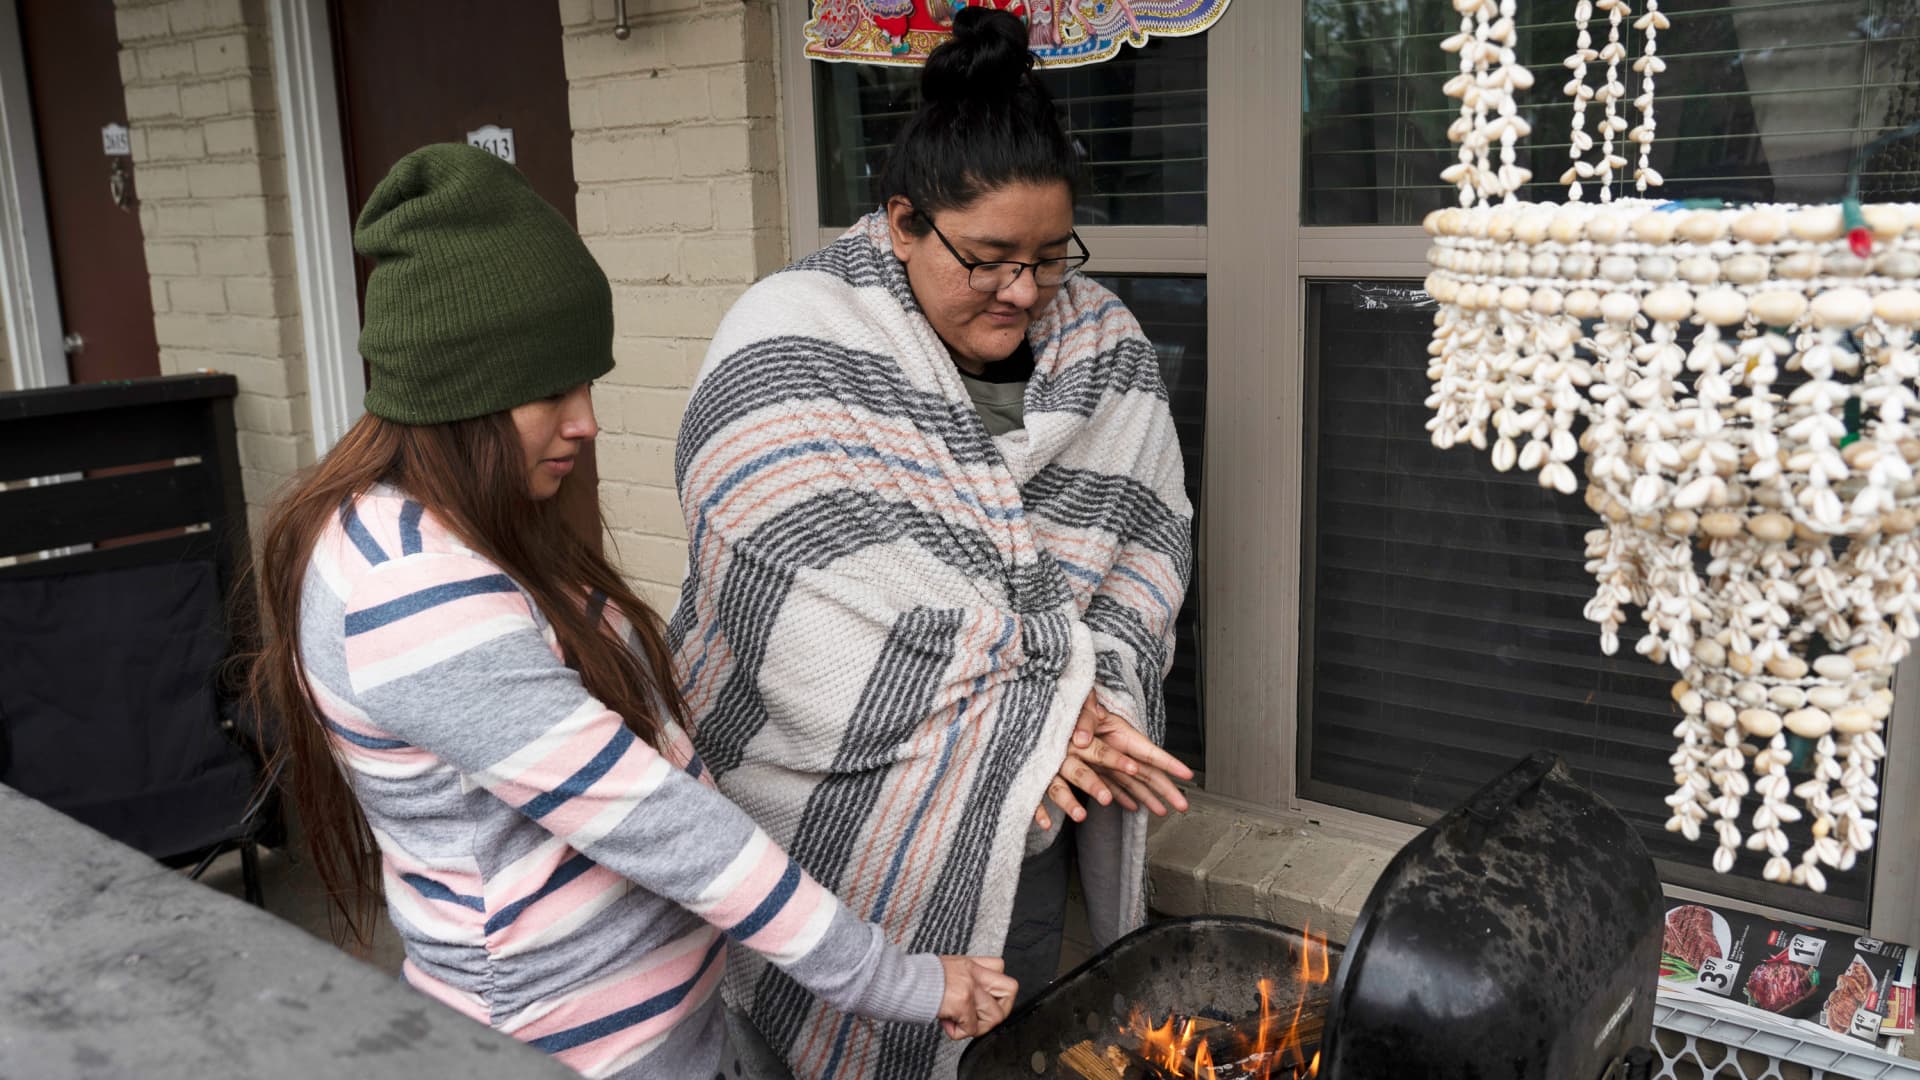 Karla Perez and Esperanza Gonzalez warm up by a barbecue grill during power outage caused by the winter storm on February 16, 2021 in Houston, Texas. Winter storm Uri has brought historic cold weather, power outages and traffic accidents to Texas as storms have swept across 26 states with a mix of freezing temperatures and precipitation.